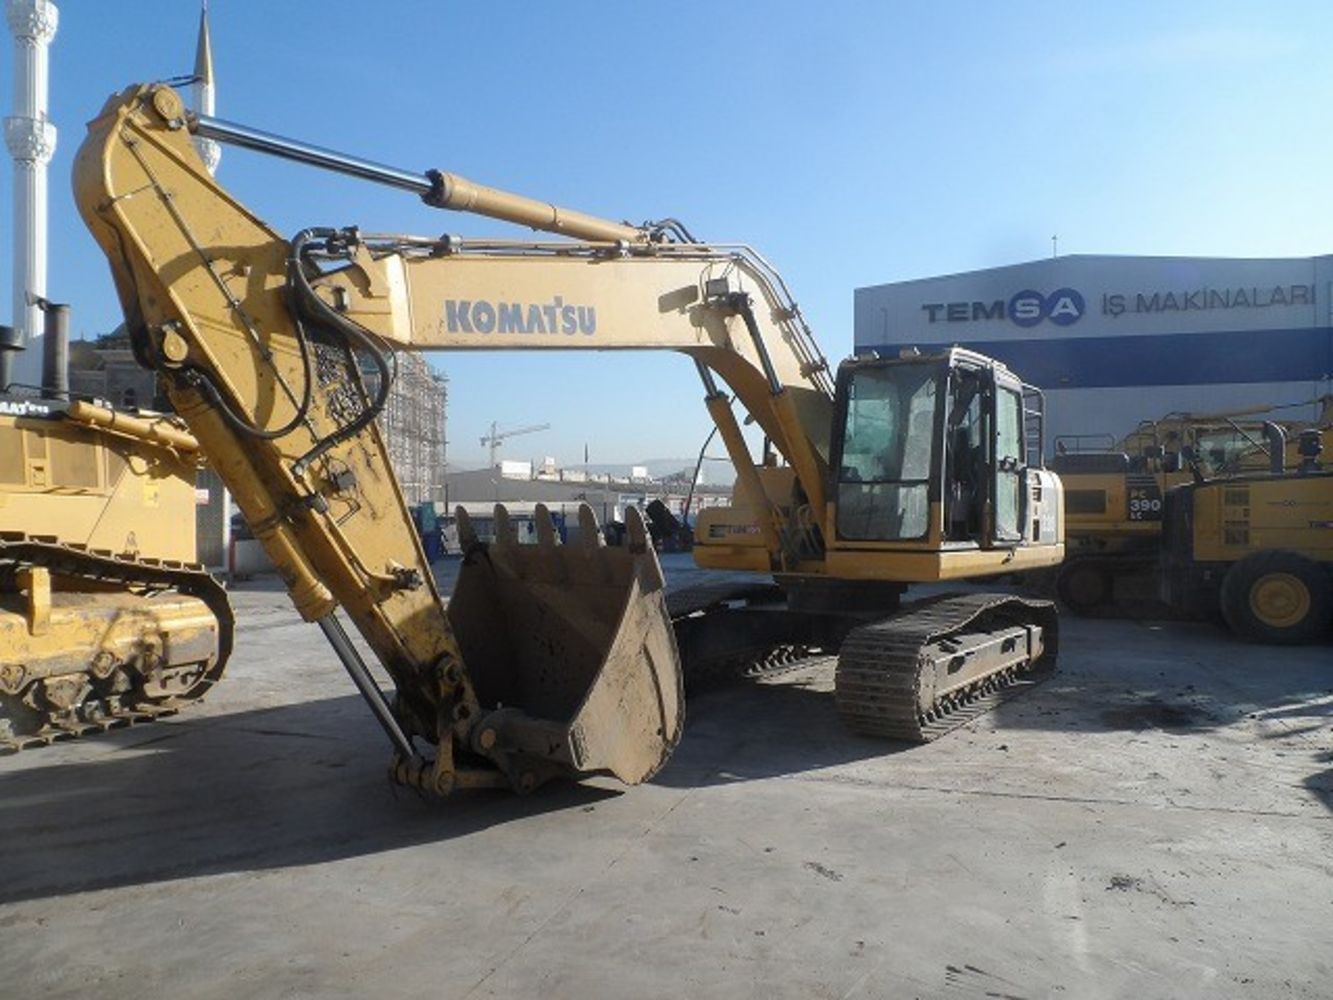 Major Reduction Sale of Late Model Excavators and Construction Equipment